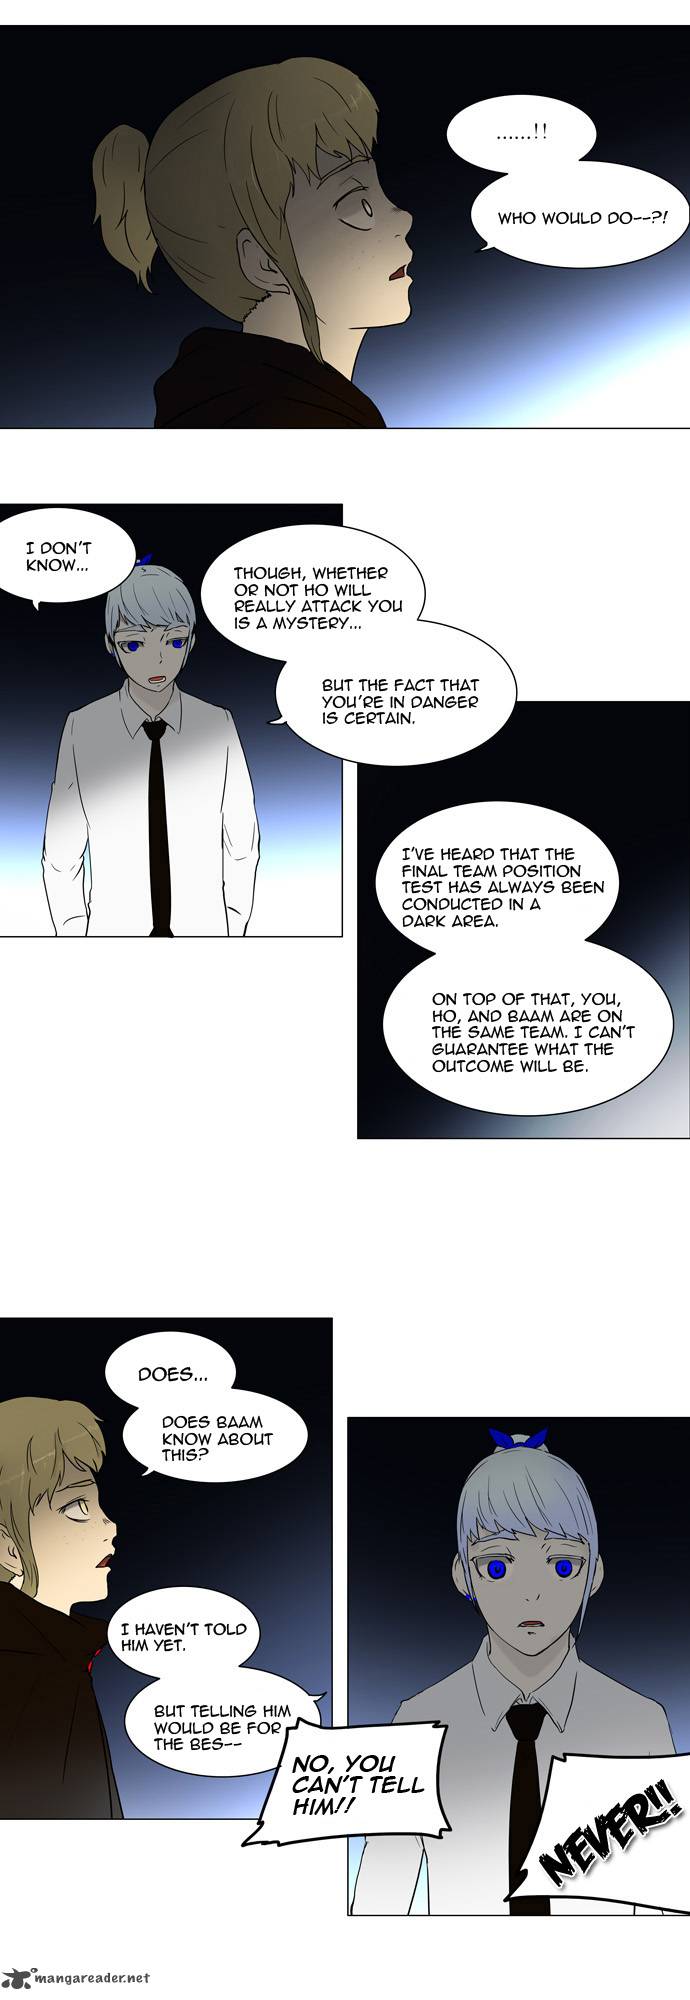 Tower Of God 55 17